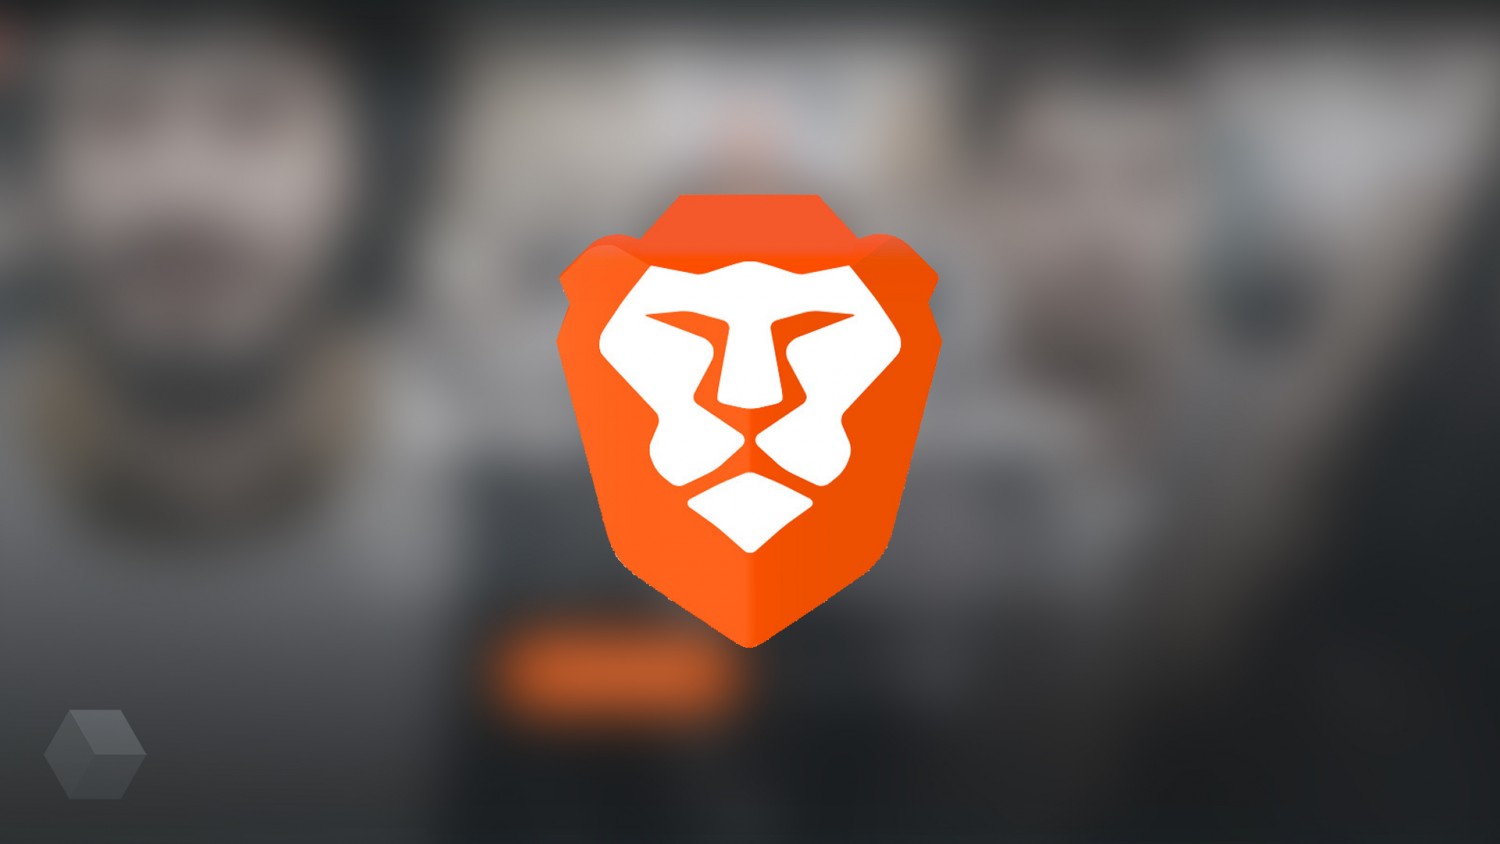 free for apple download Браузер brave 1.56.11